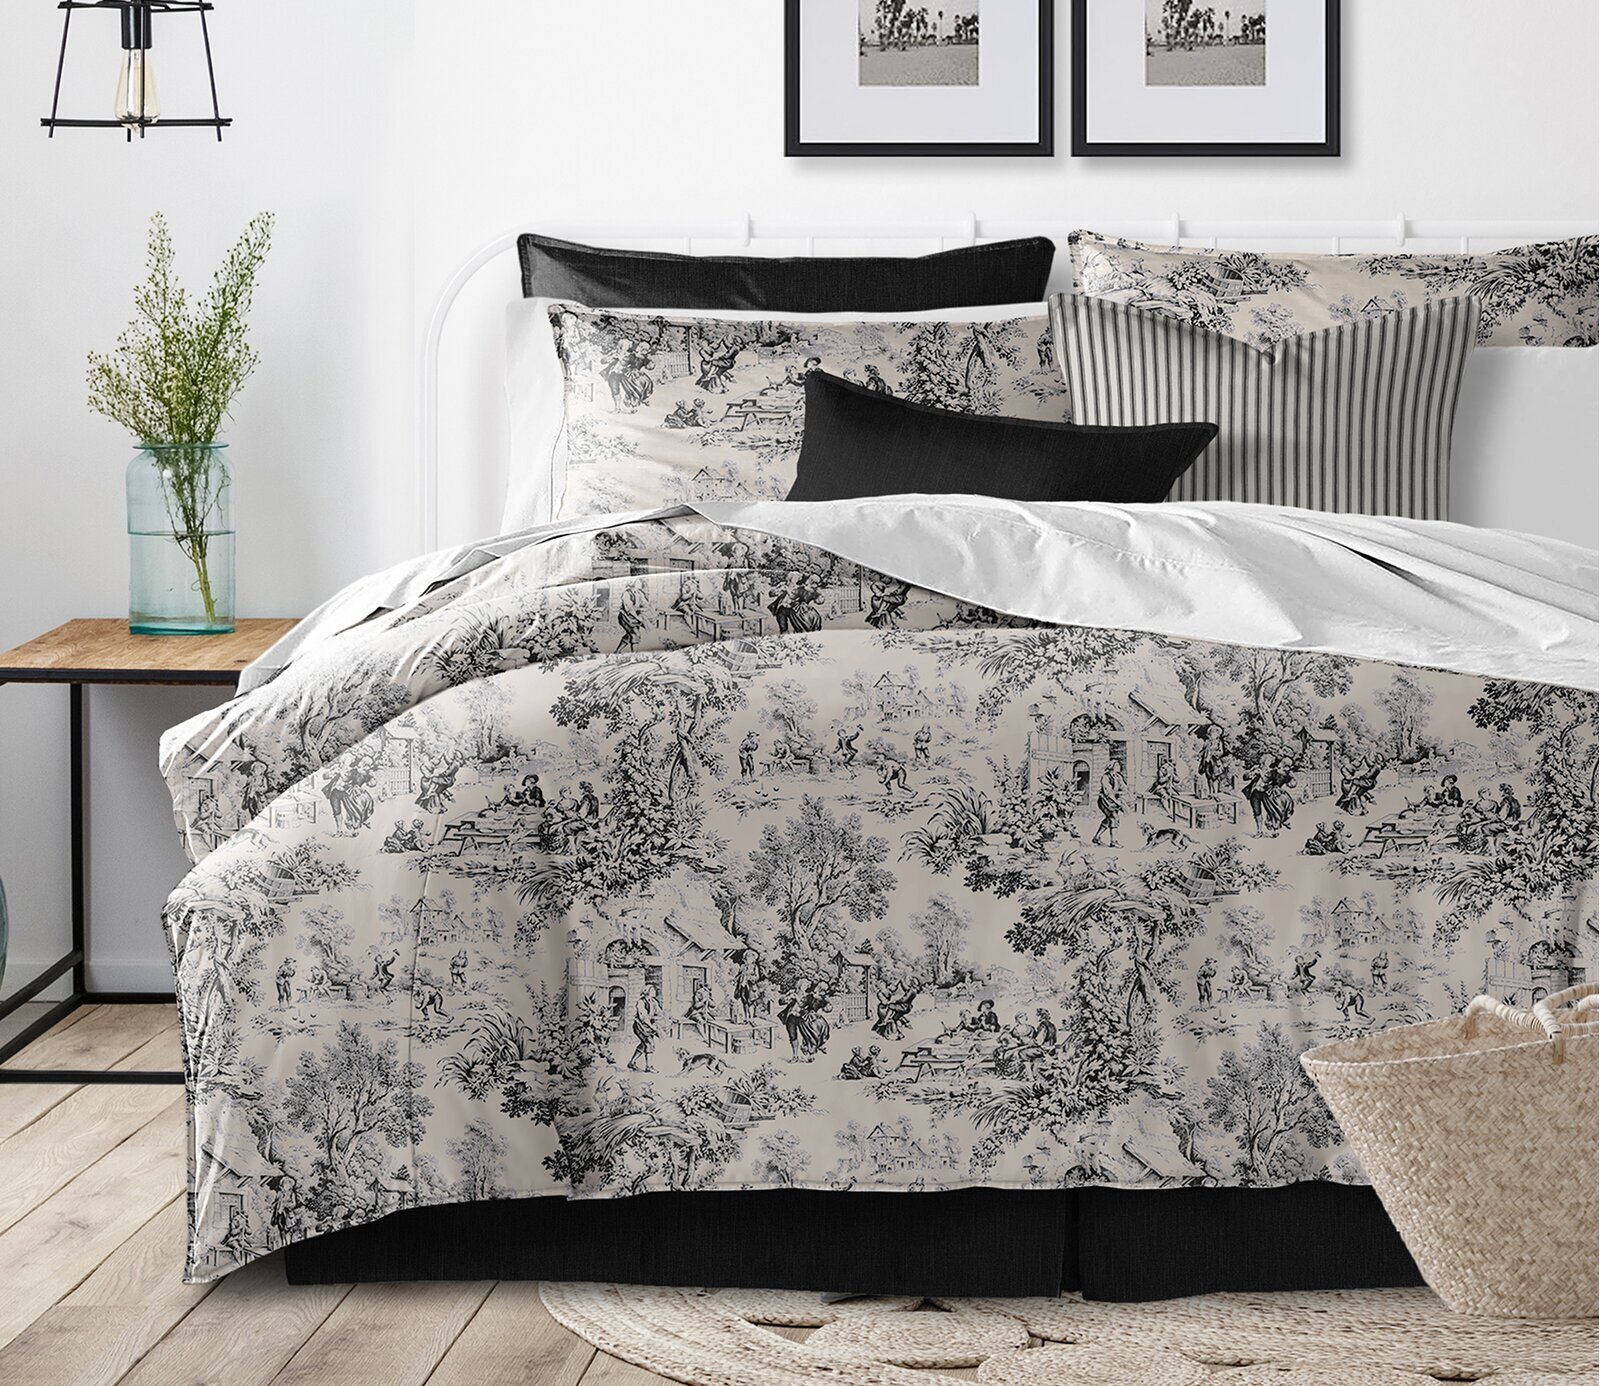 Toile Bedding Ideas on Foter